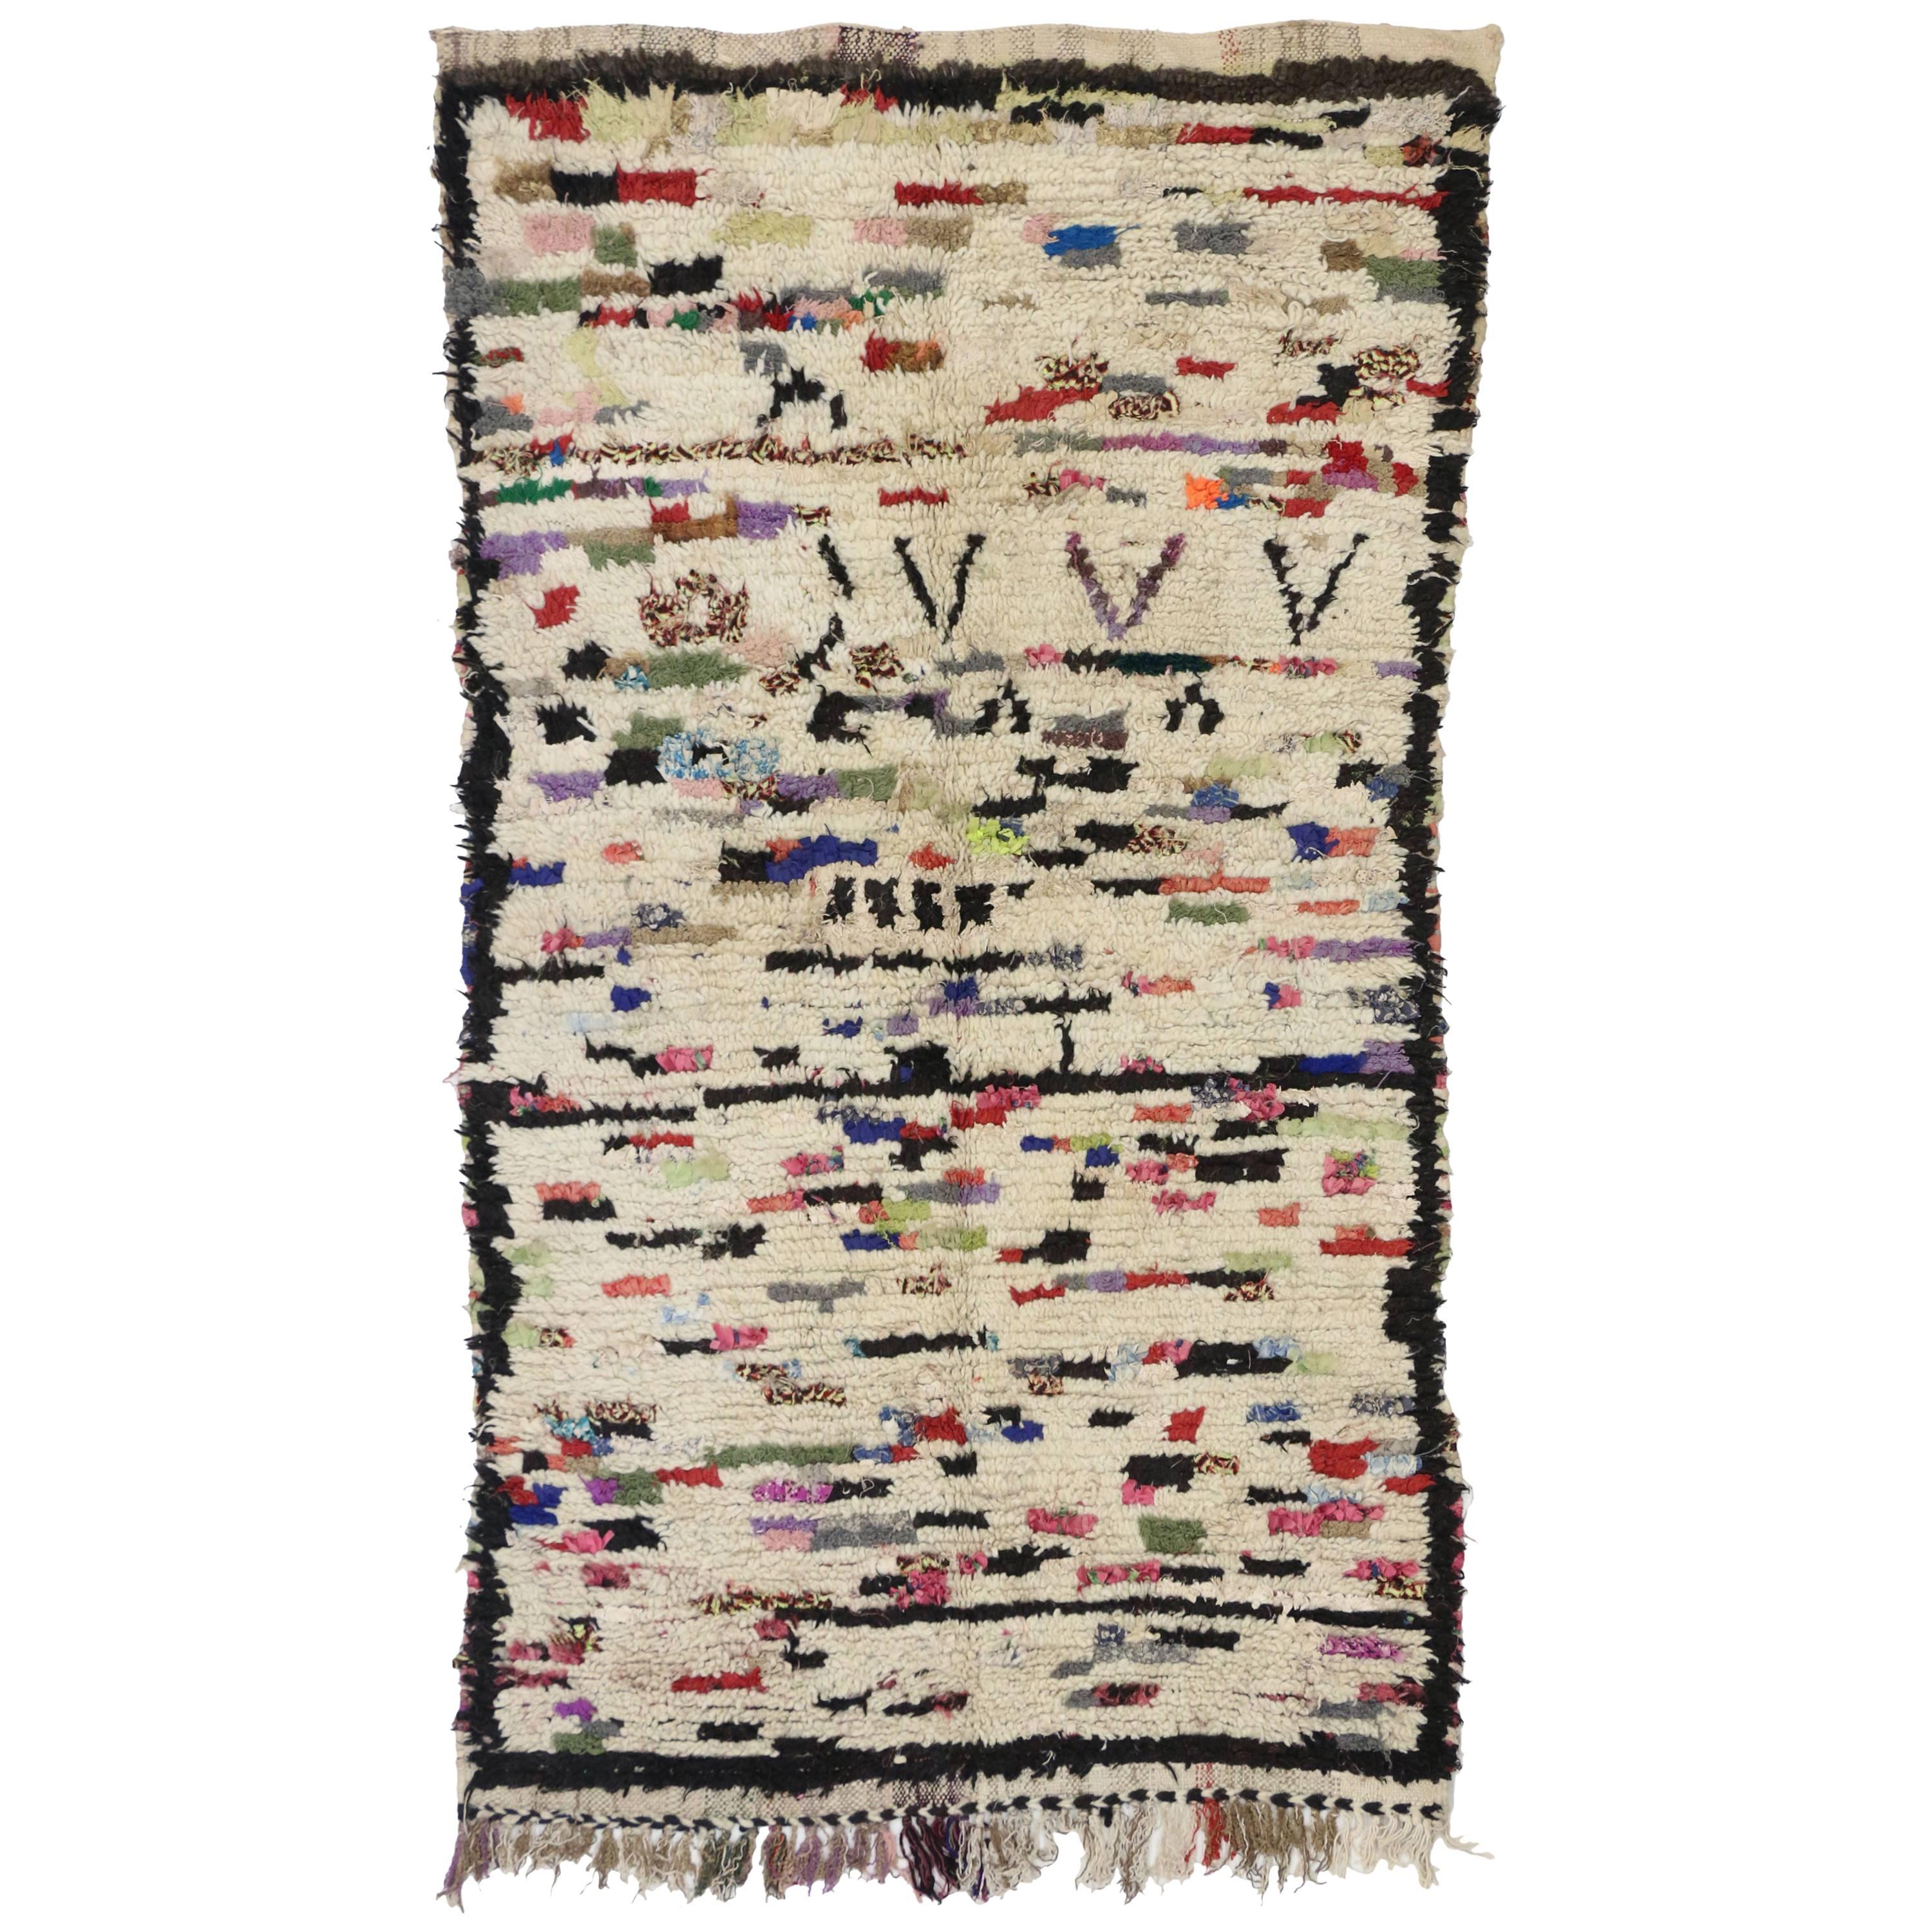 Vintage Berber Moroccan Azilal Rug with Abstract Expressionist Post-Modern Style